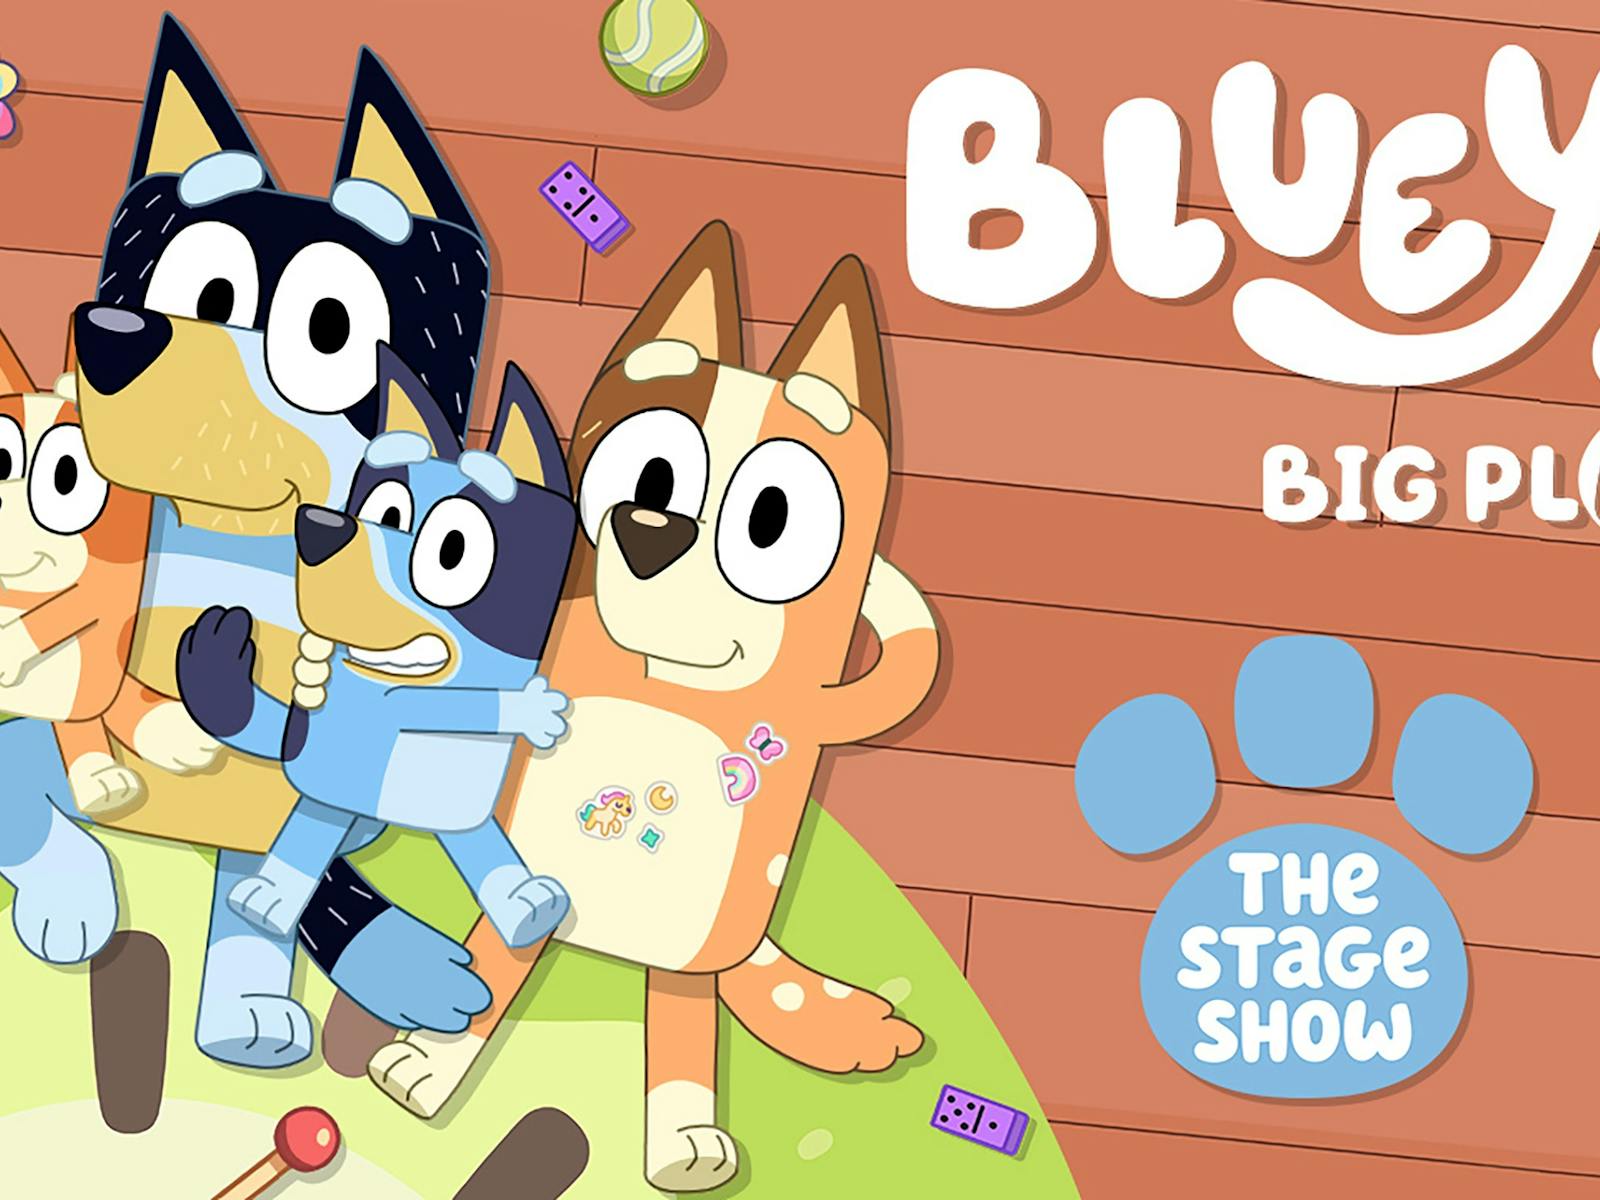 Image for Bluey's Big Play - The Stage Show at West HQ's Sydney Coliseum Theatre